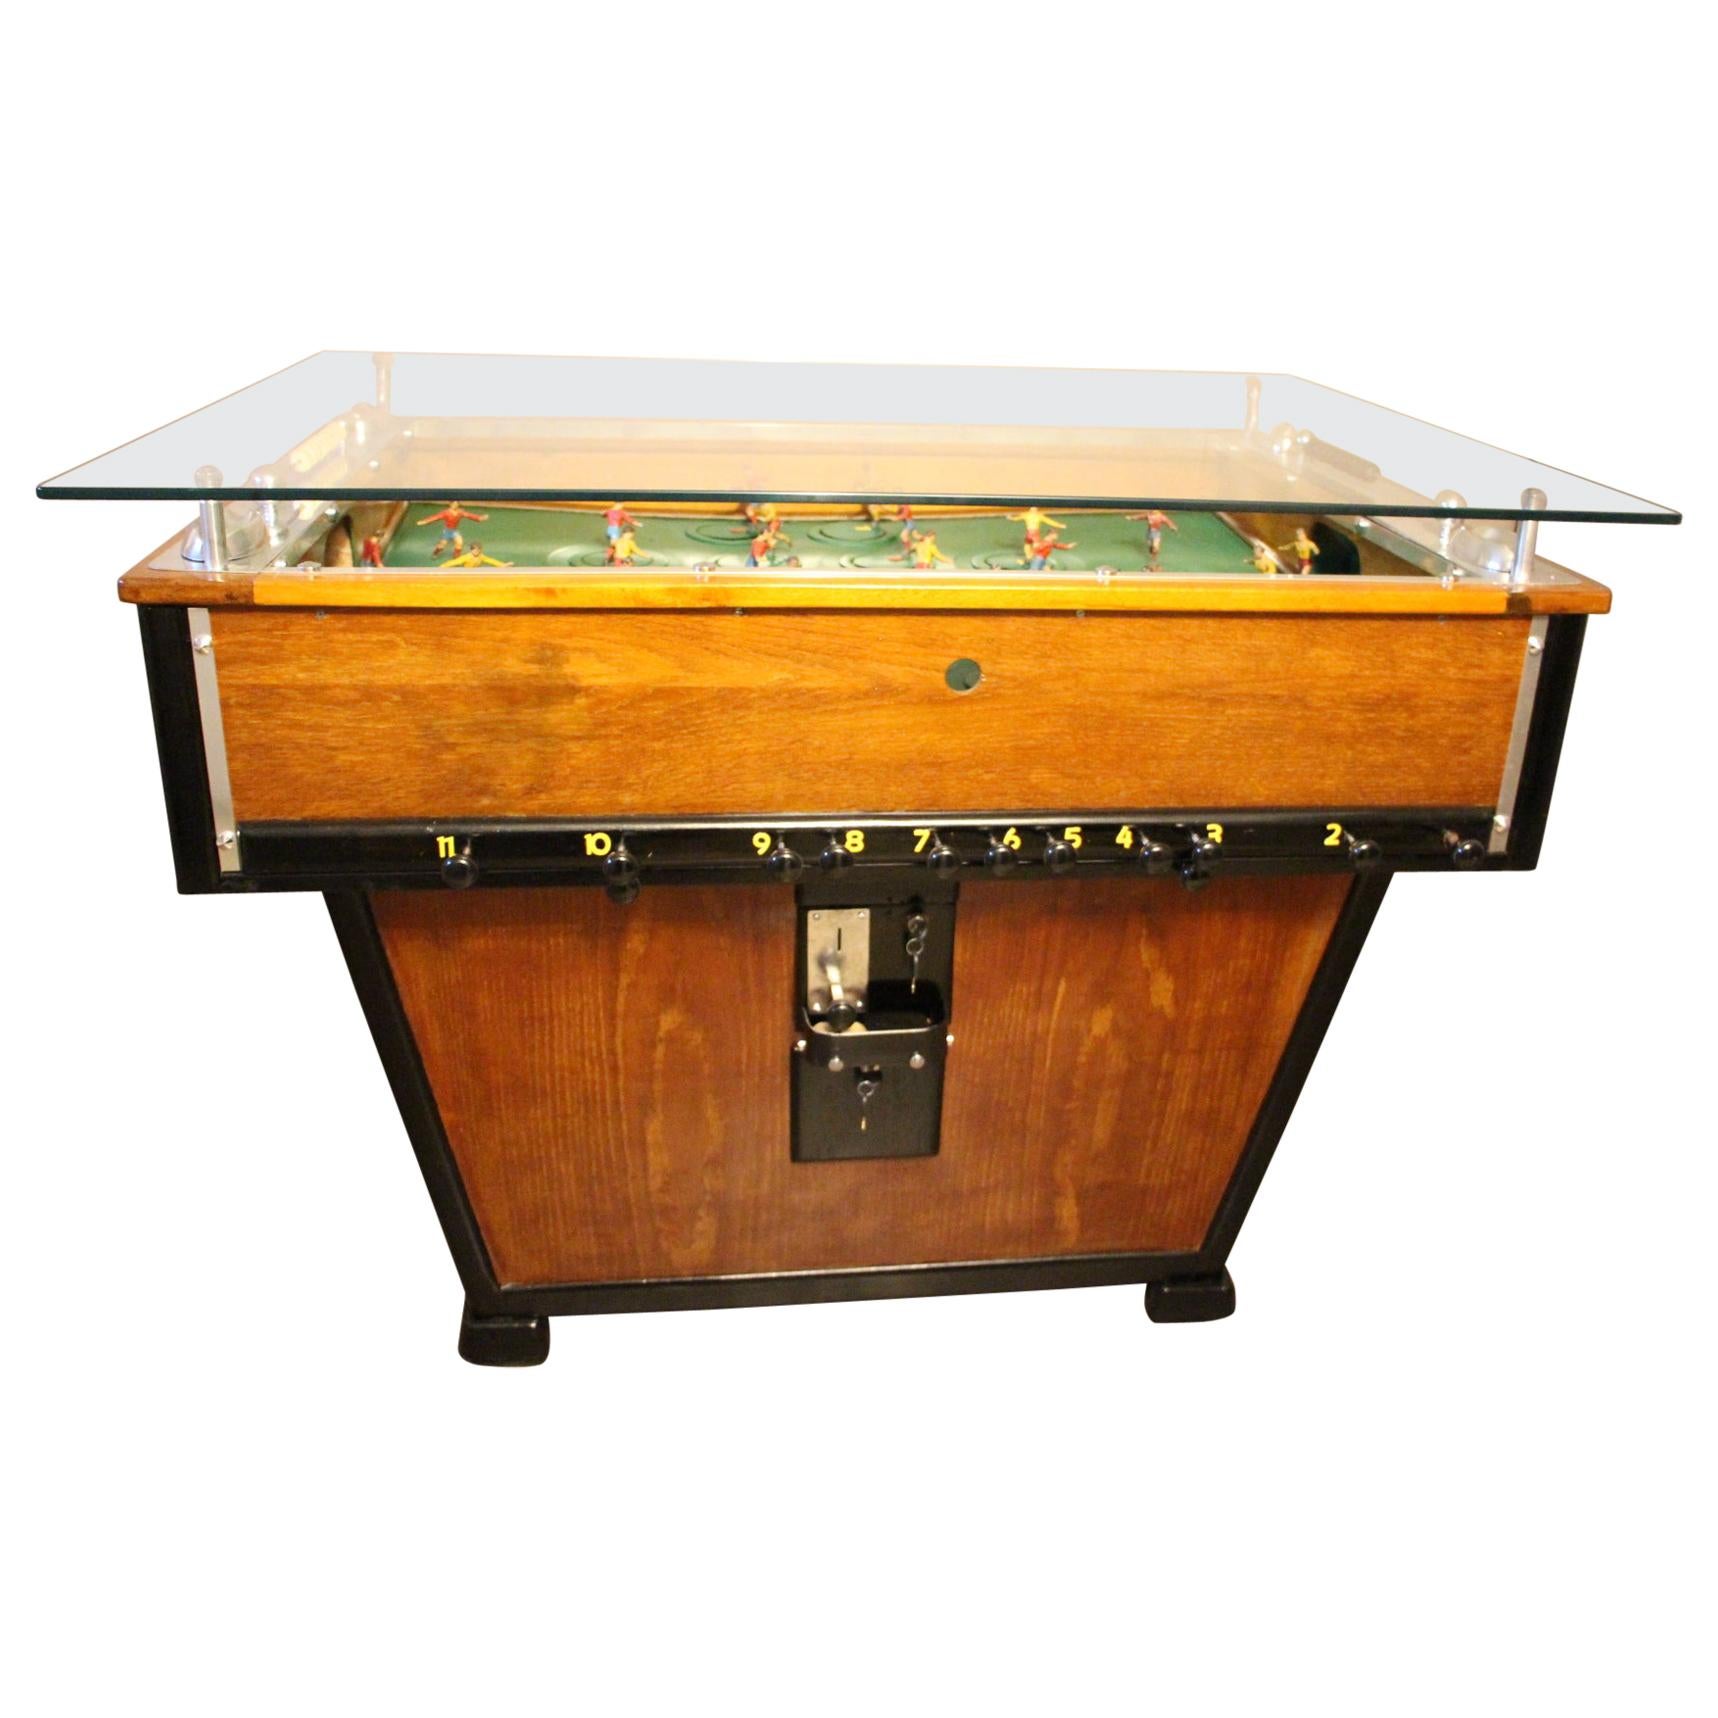 1930s French Foosball Table, Foosball Counter Table, Sportfoot Table